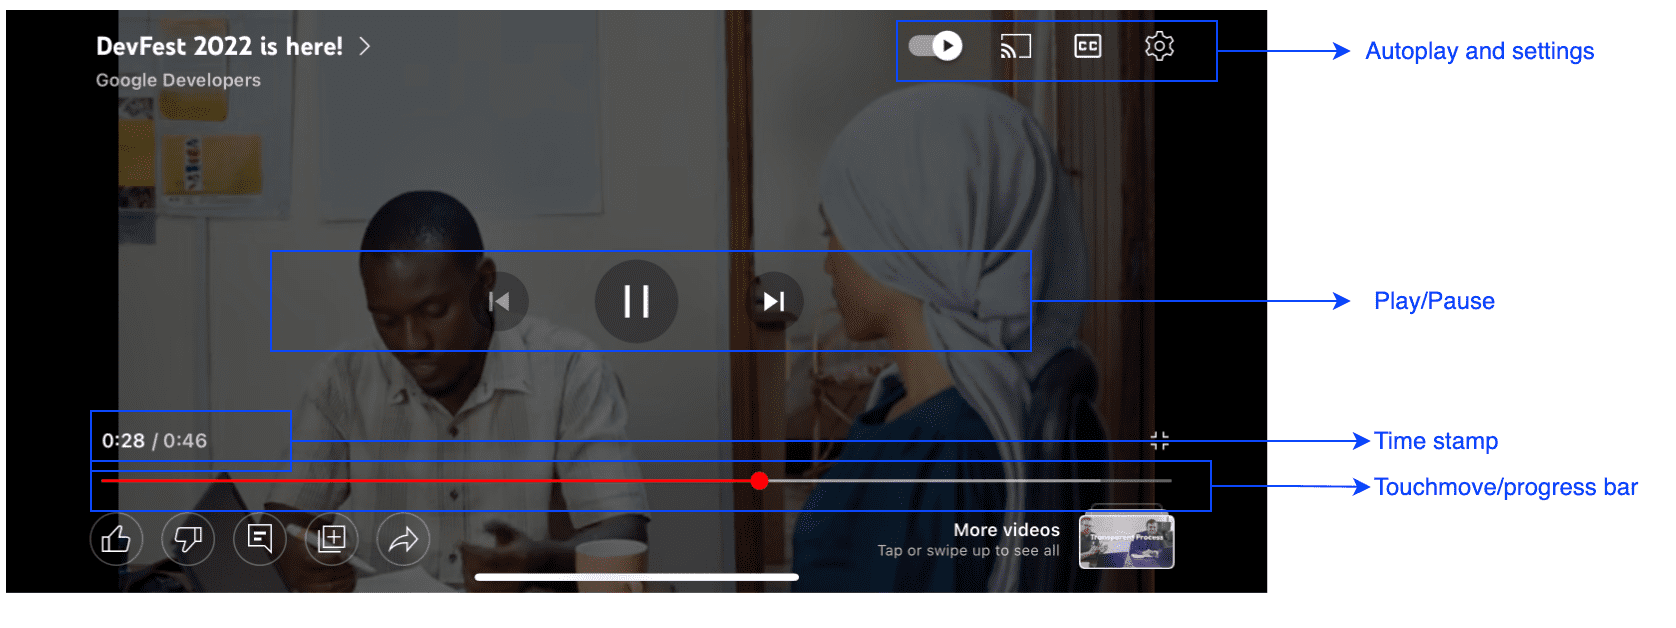 YouTube player and controls visualized